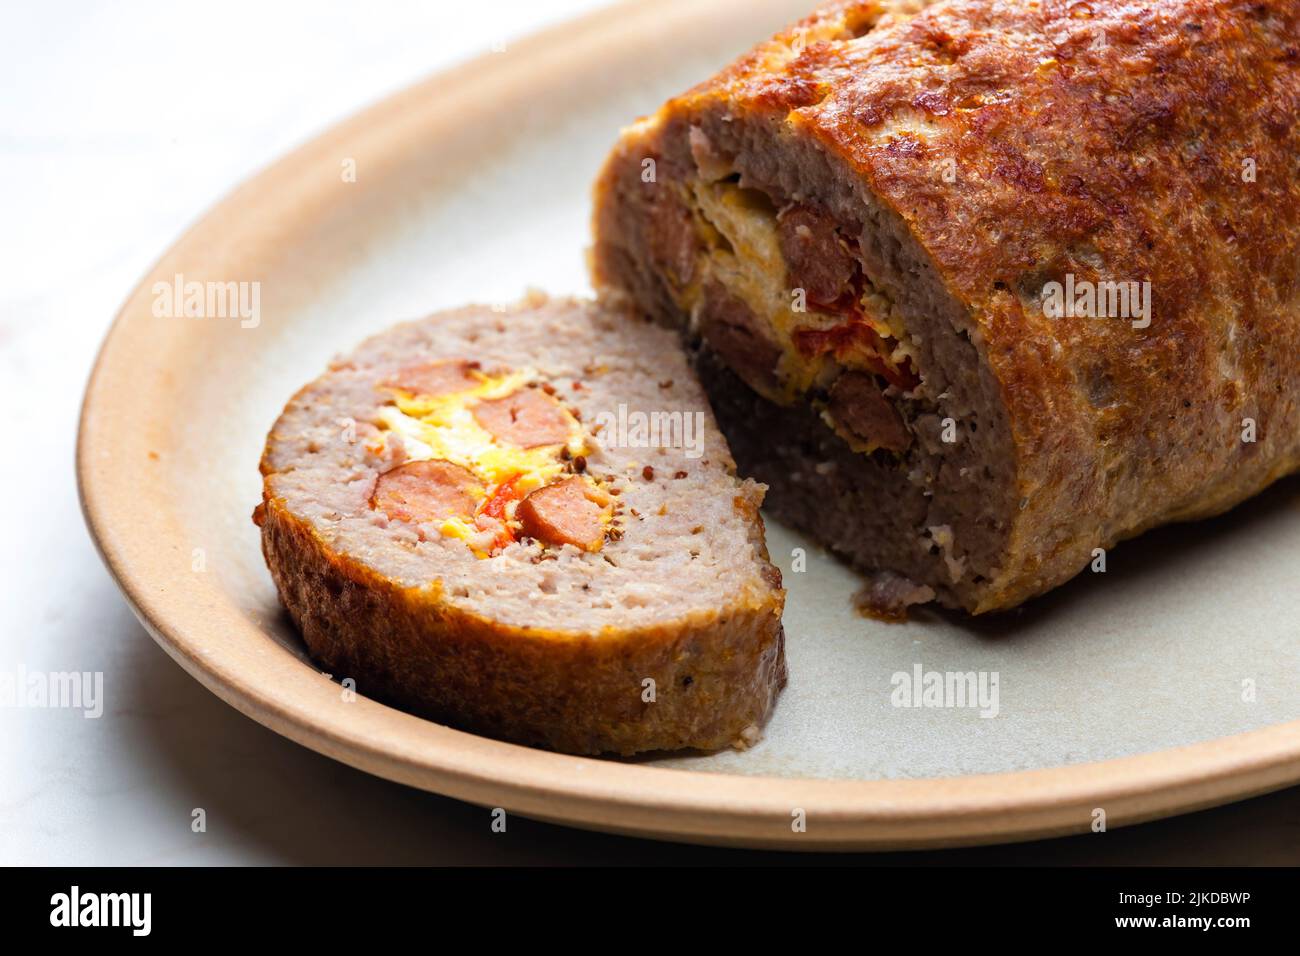 homemade meat loaf filled with egg and sausage. Stock Photo